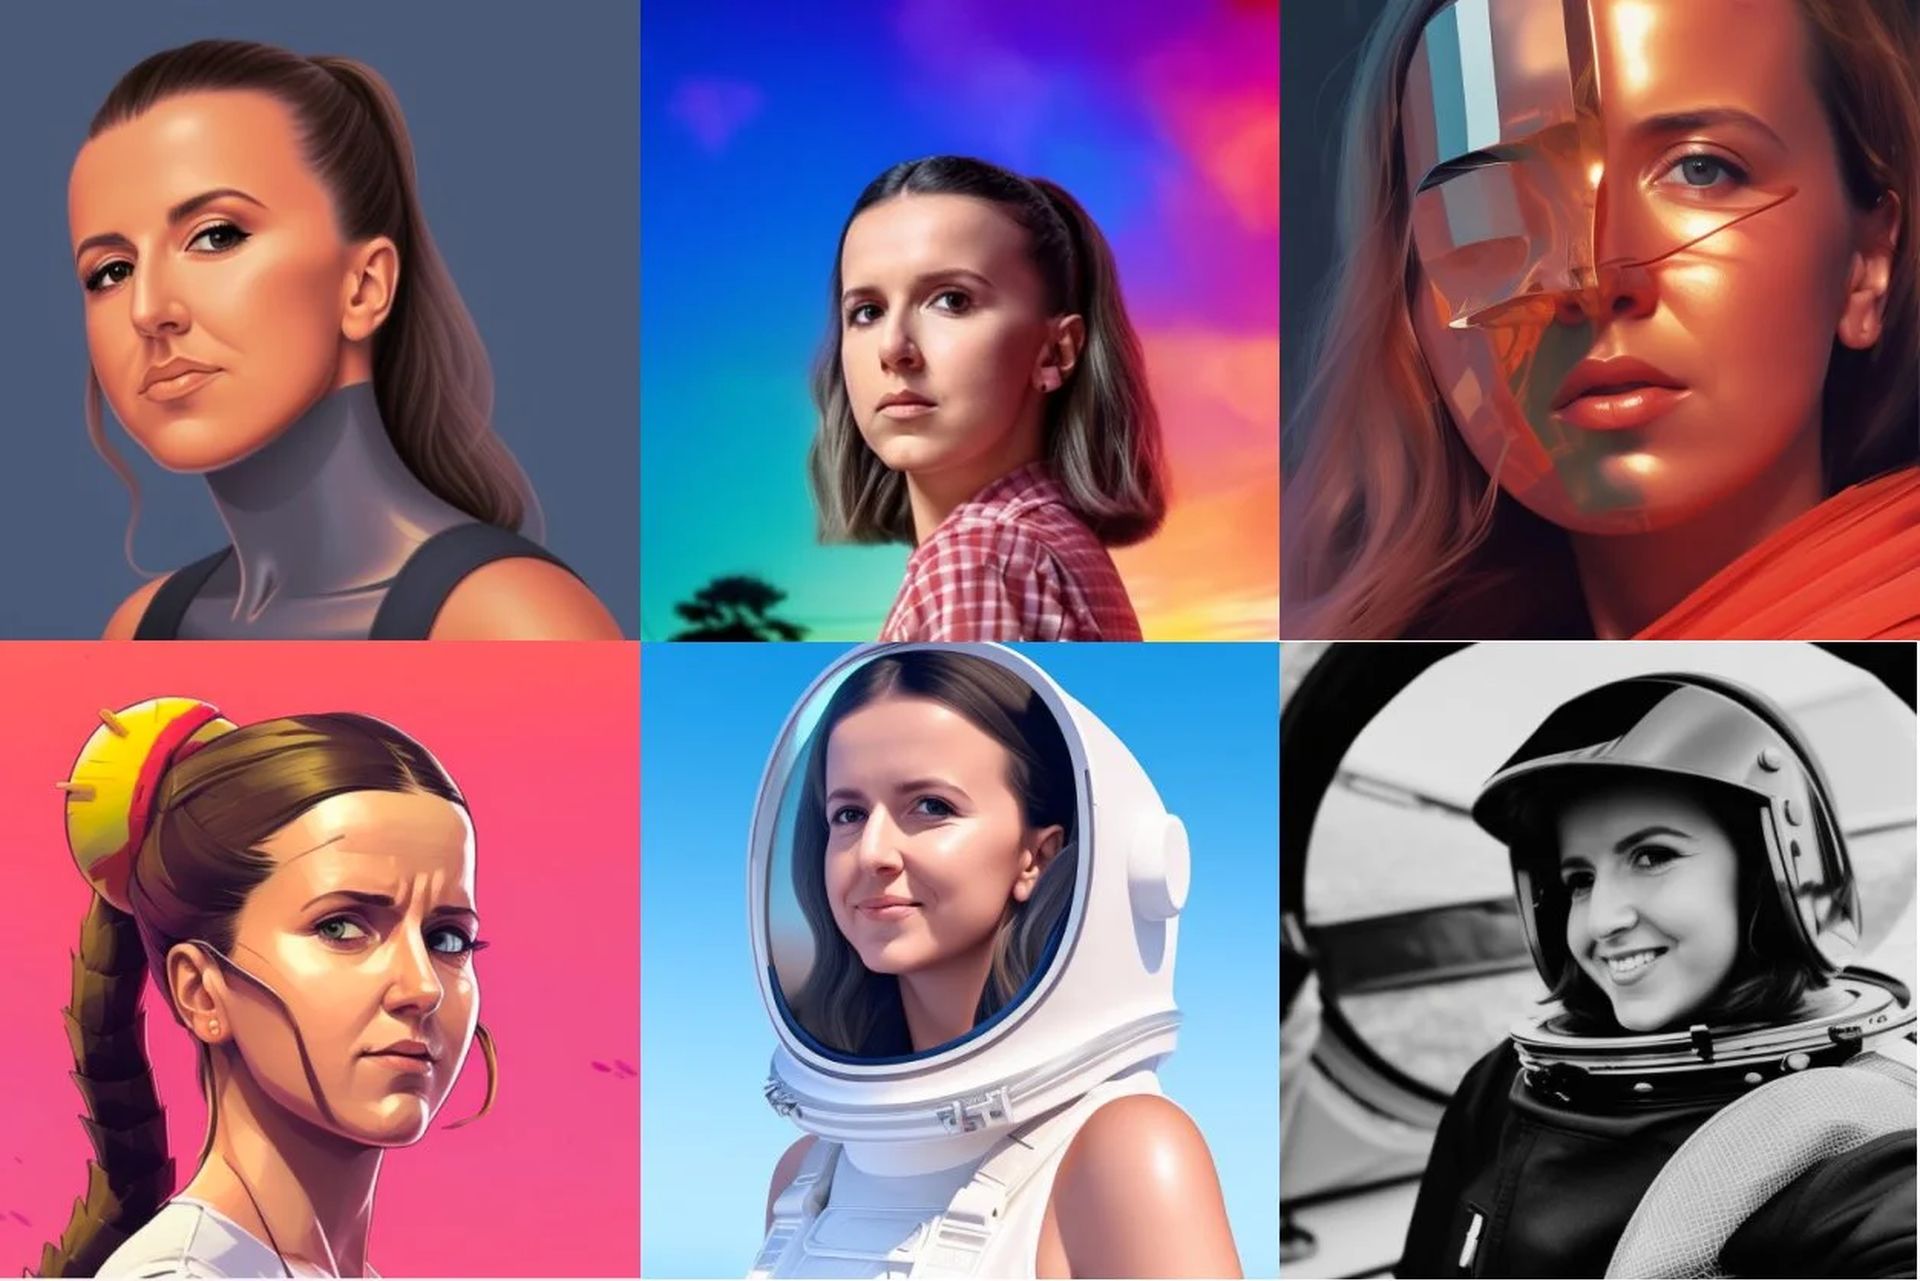 Lensa AI is a great option to be a part of the Instagram AI trend by modifying your AI-generated selfies